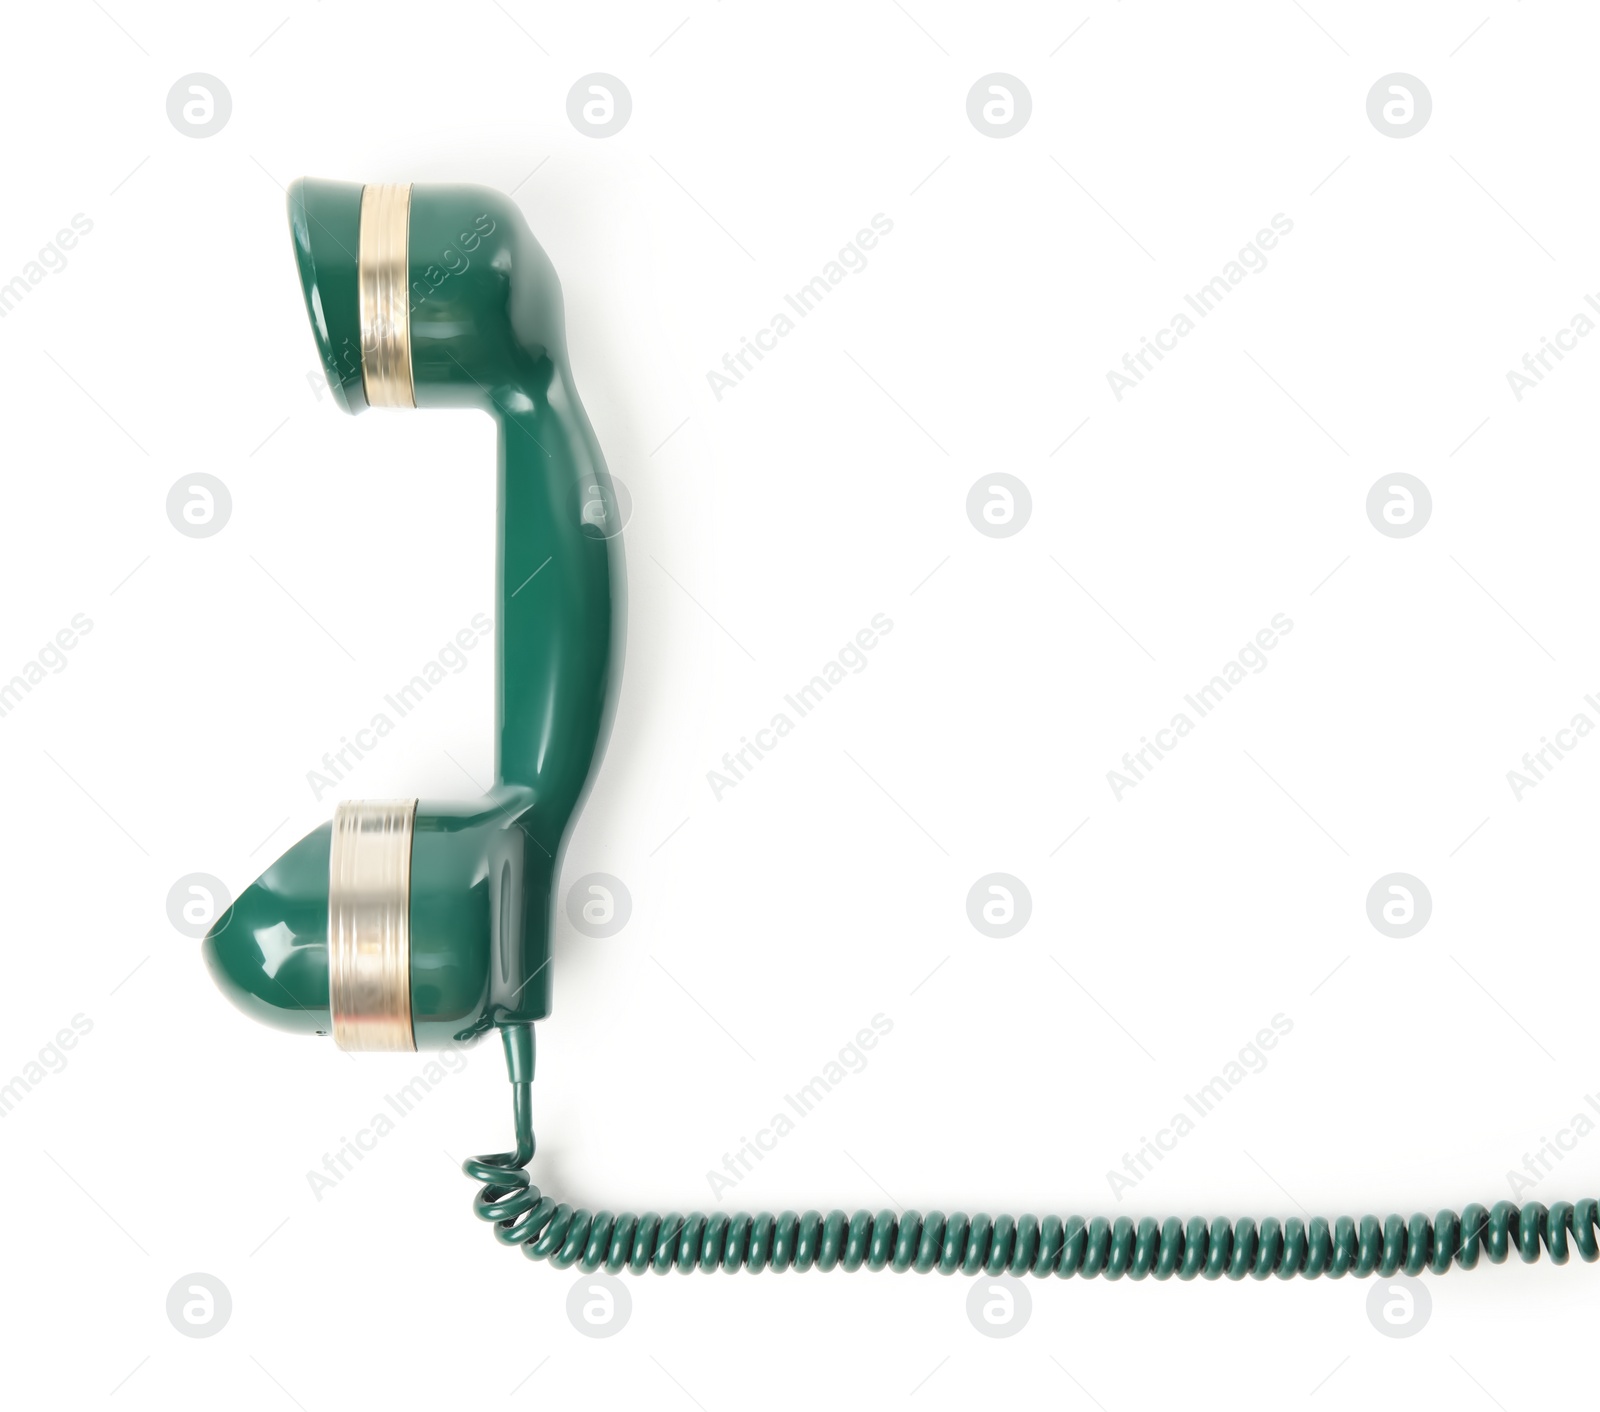 Photo of Handset of vintage green telephone isolated on white